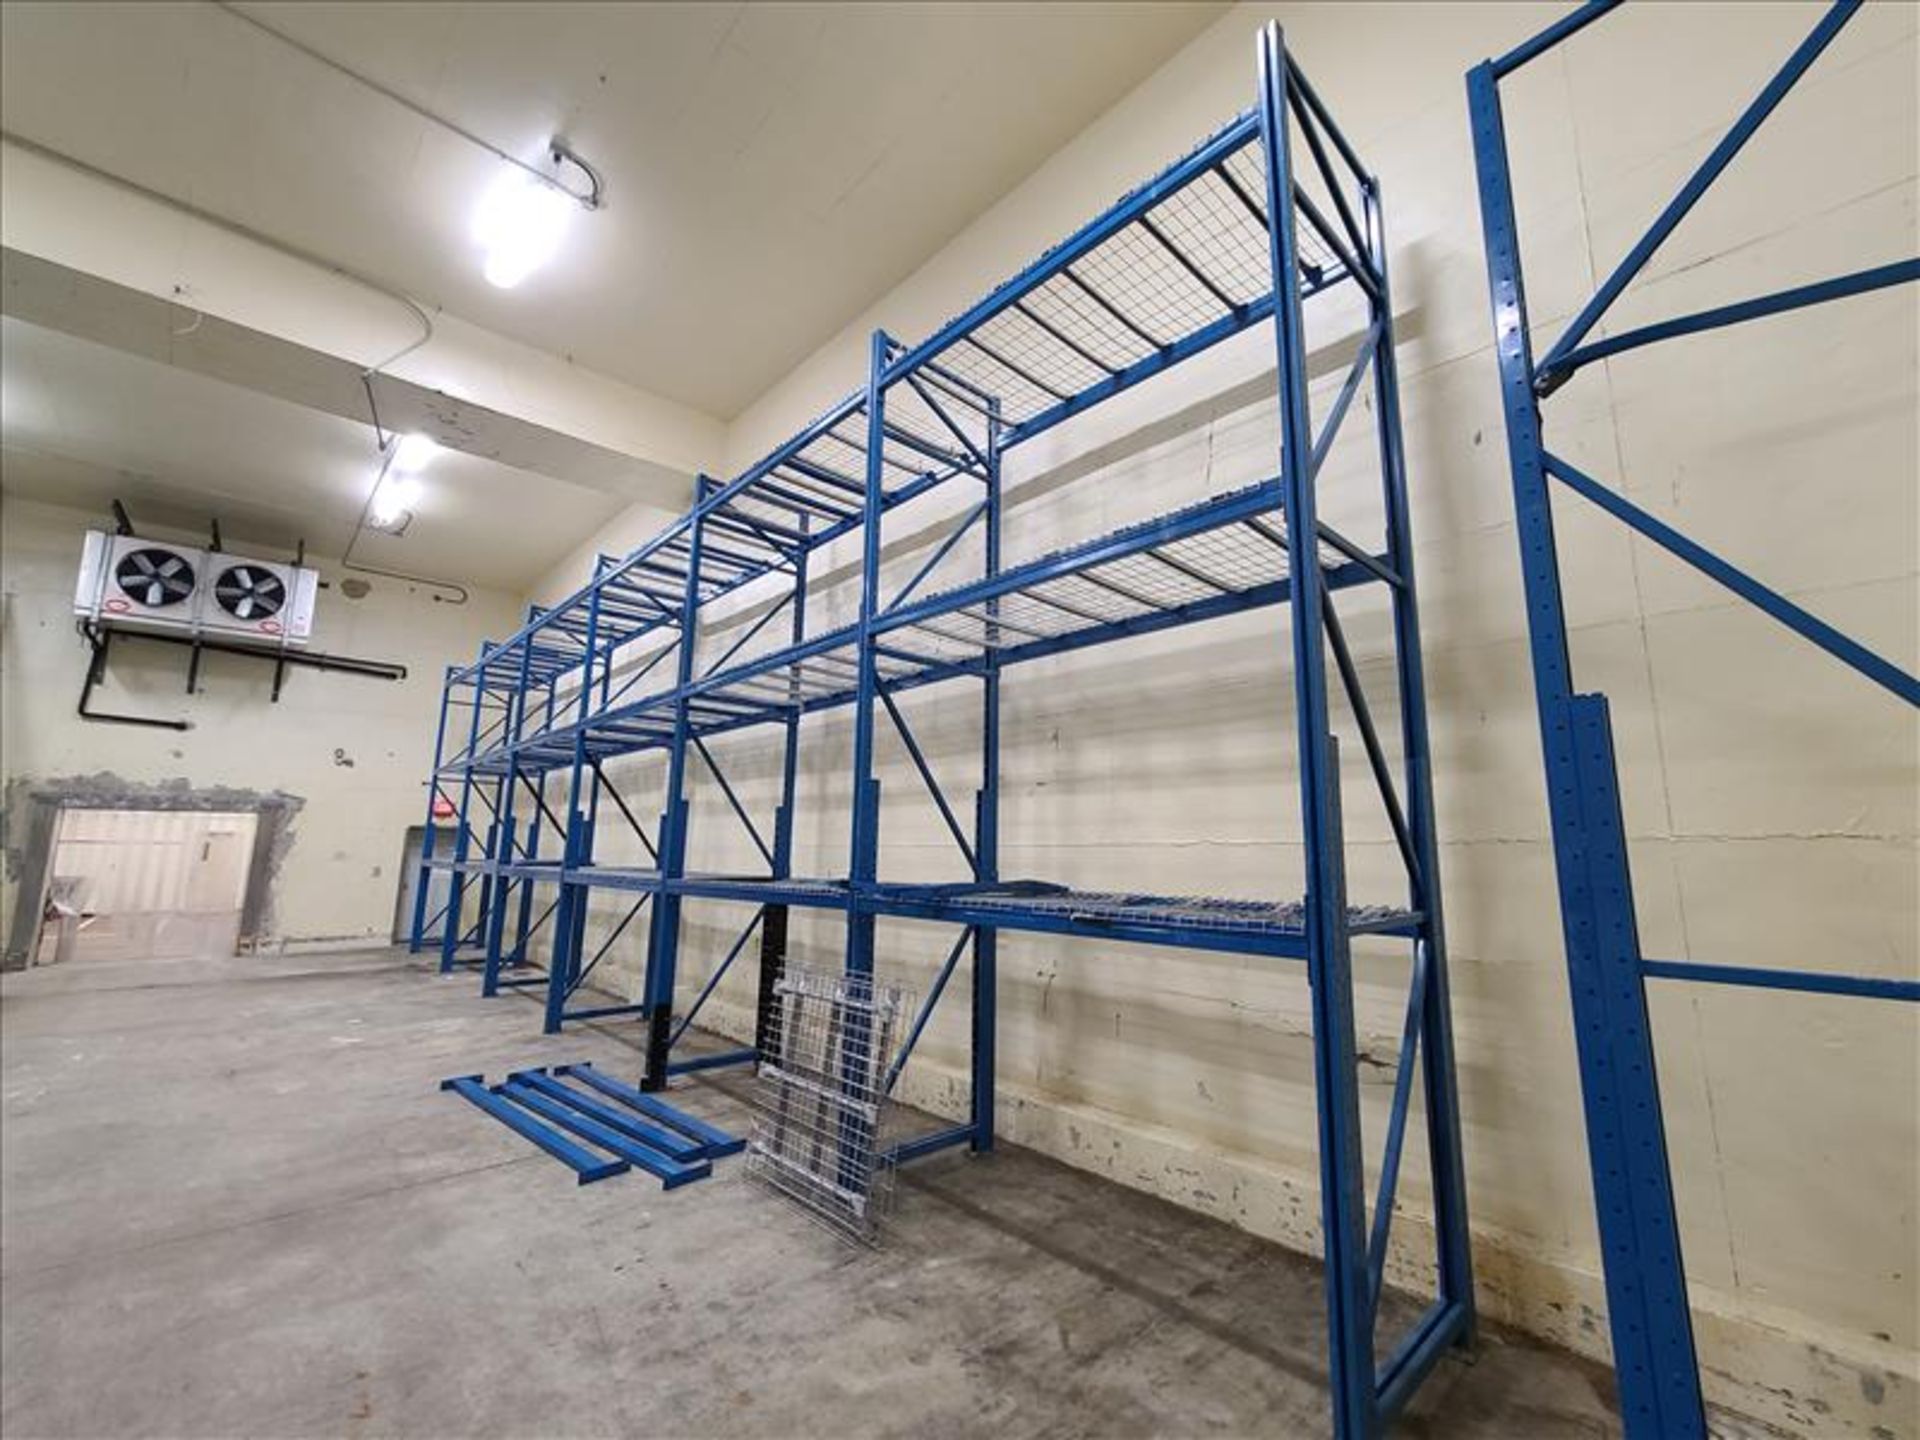 [LOT] (7) section pallet rack, 16' x 42"w (7) upright, (40) 8' cross bar [Packaging Warehouse] - Image 2 of 4